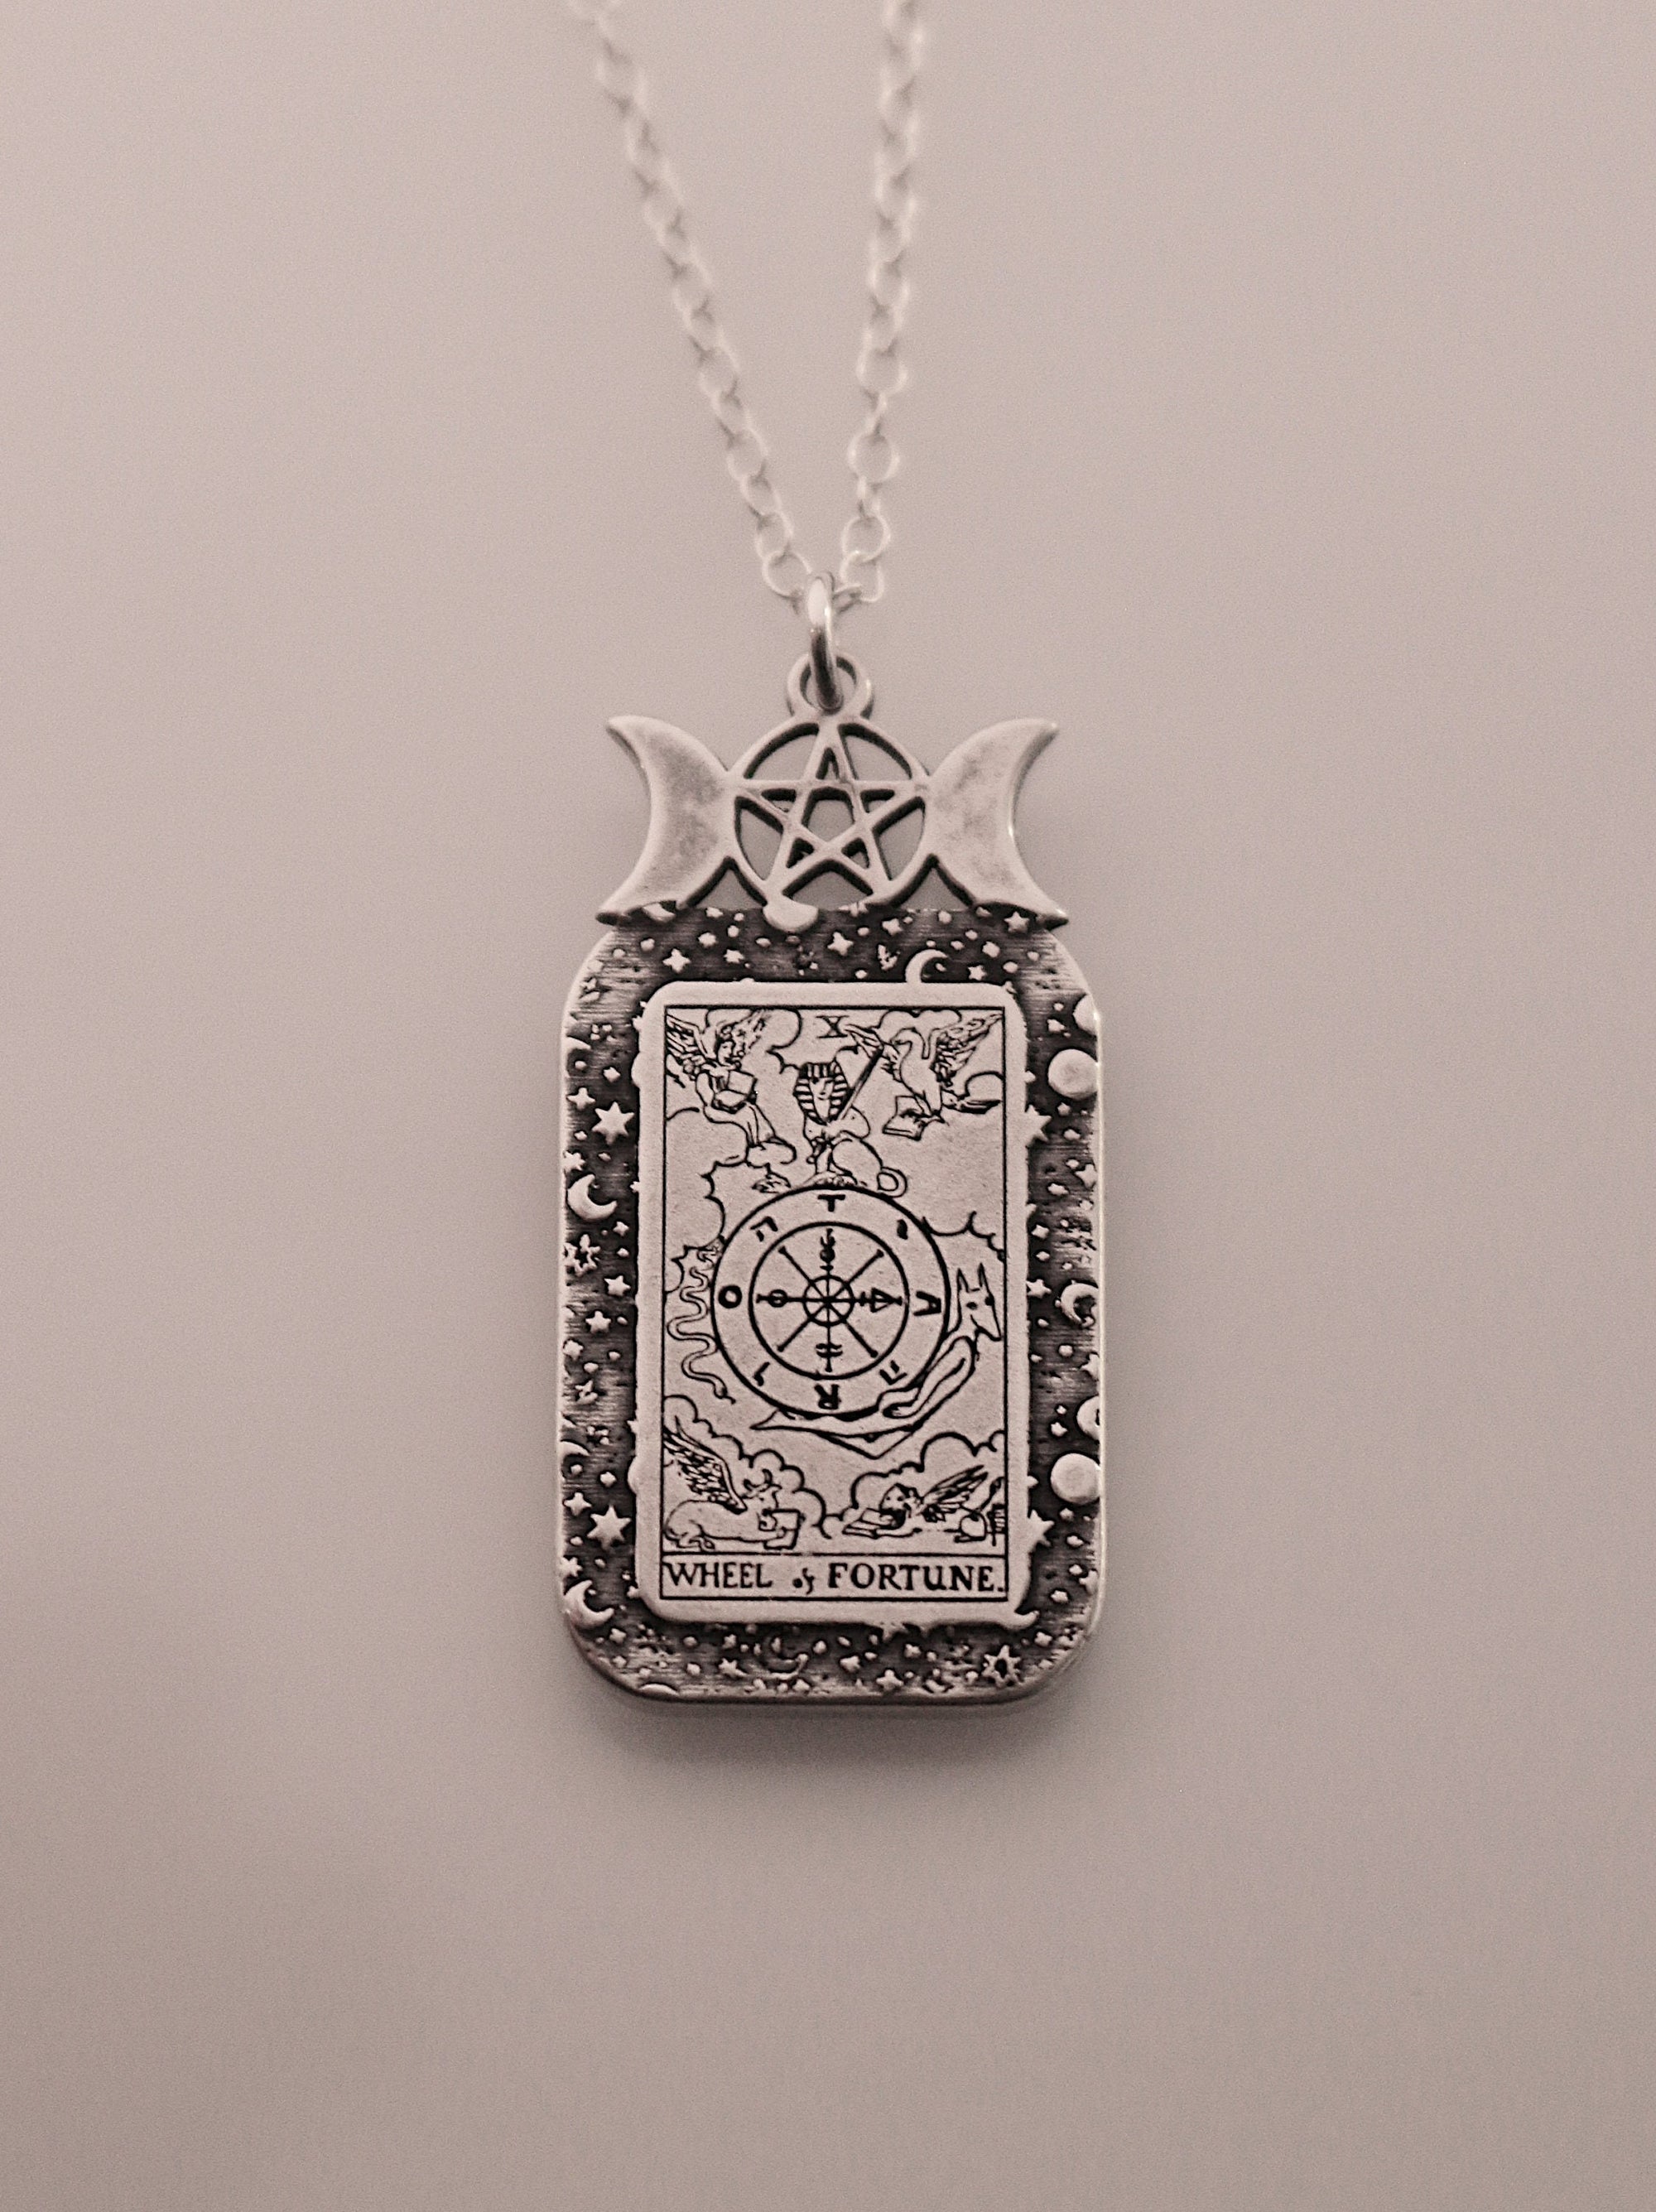 The Wheel of Fortune Tarot Card Necklace | Best Friend Birthday Gift | Tarot Card Necklace | Celestial Triple Moon Goddess Jewelry | Witch